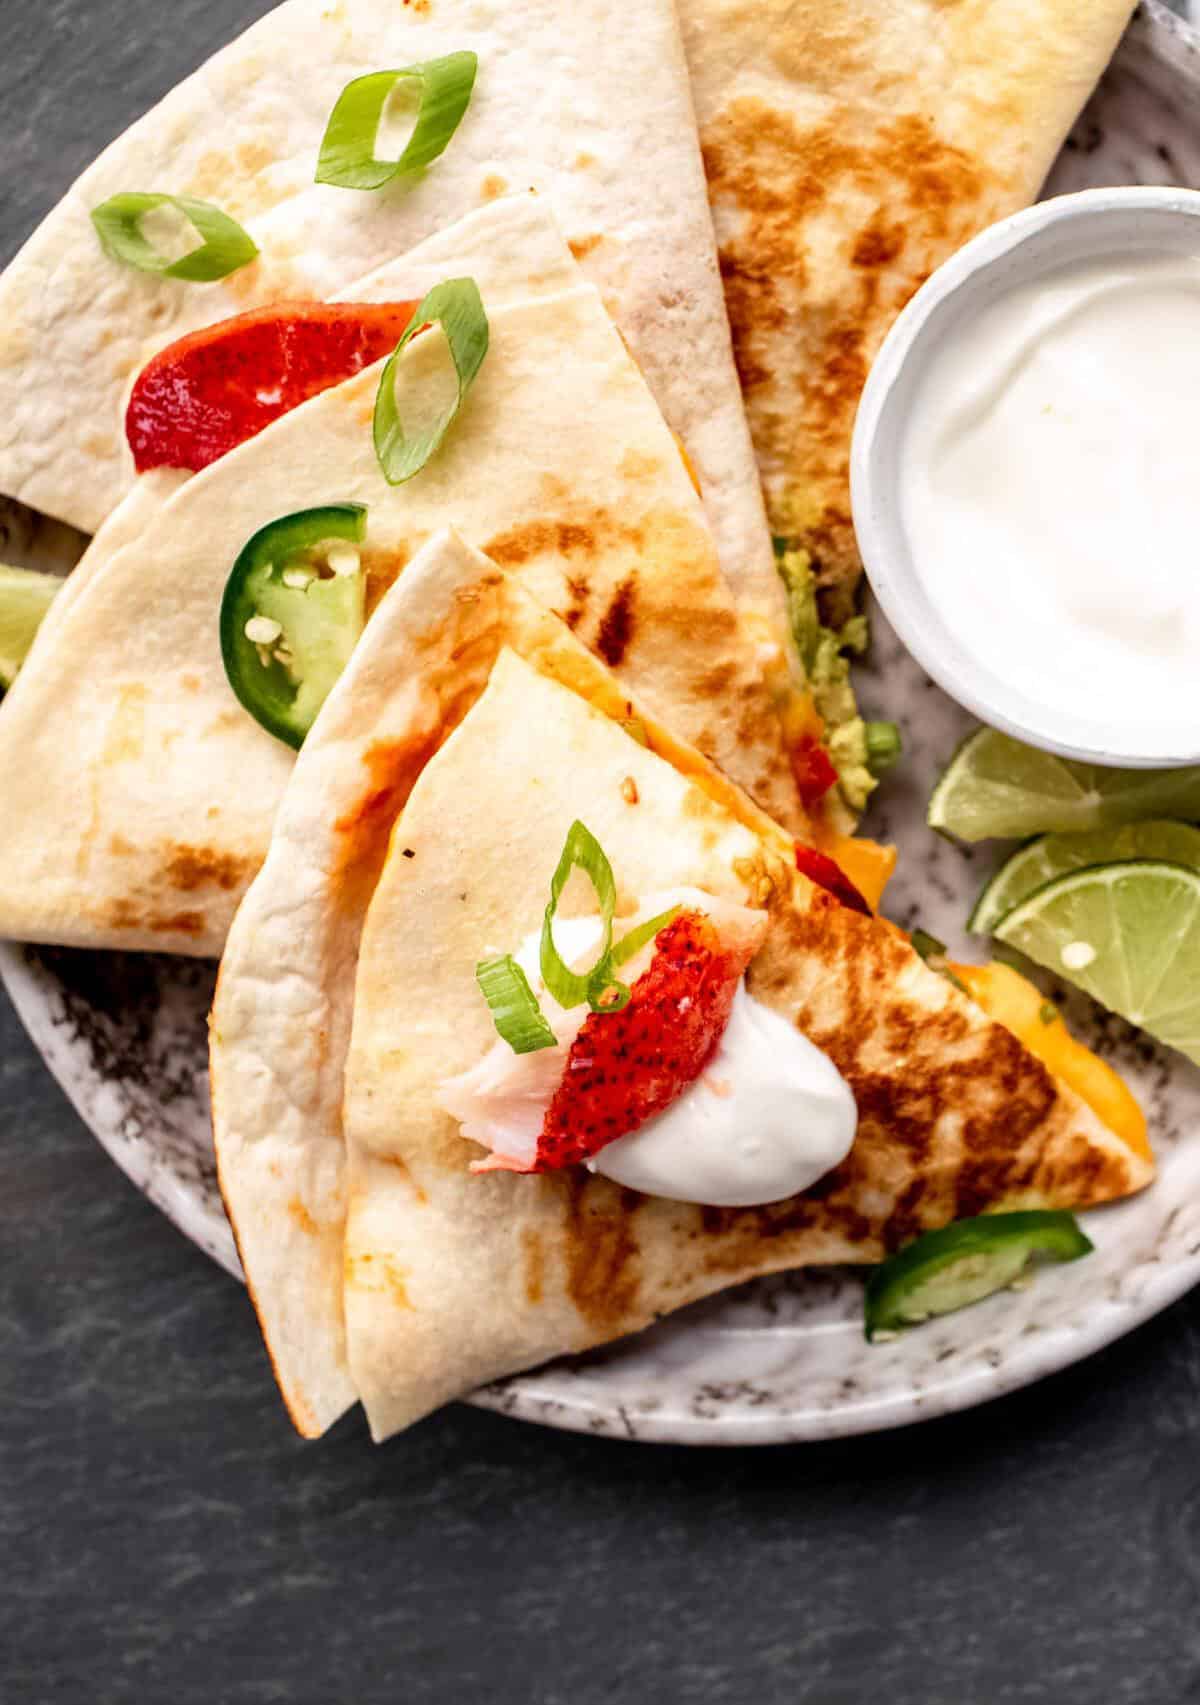  Want to impress your guests? Serve them these amazing Lobster Quesadillas!